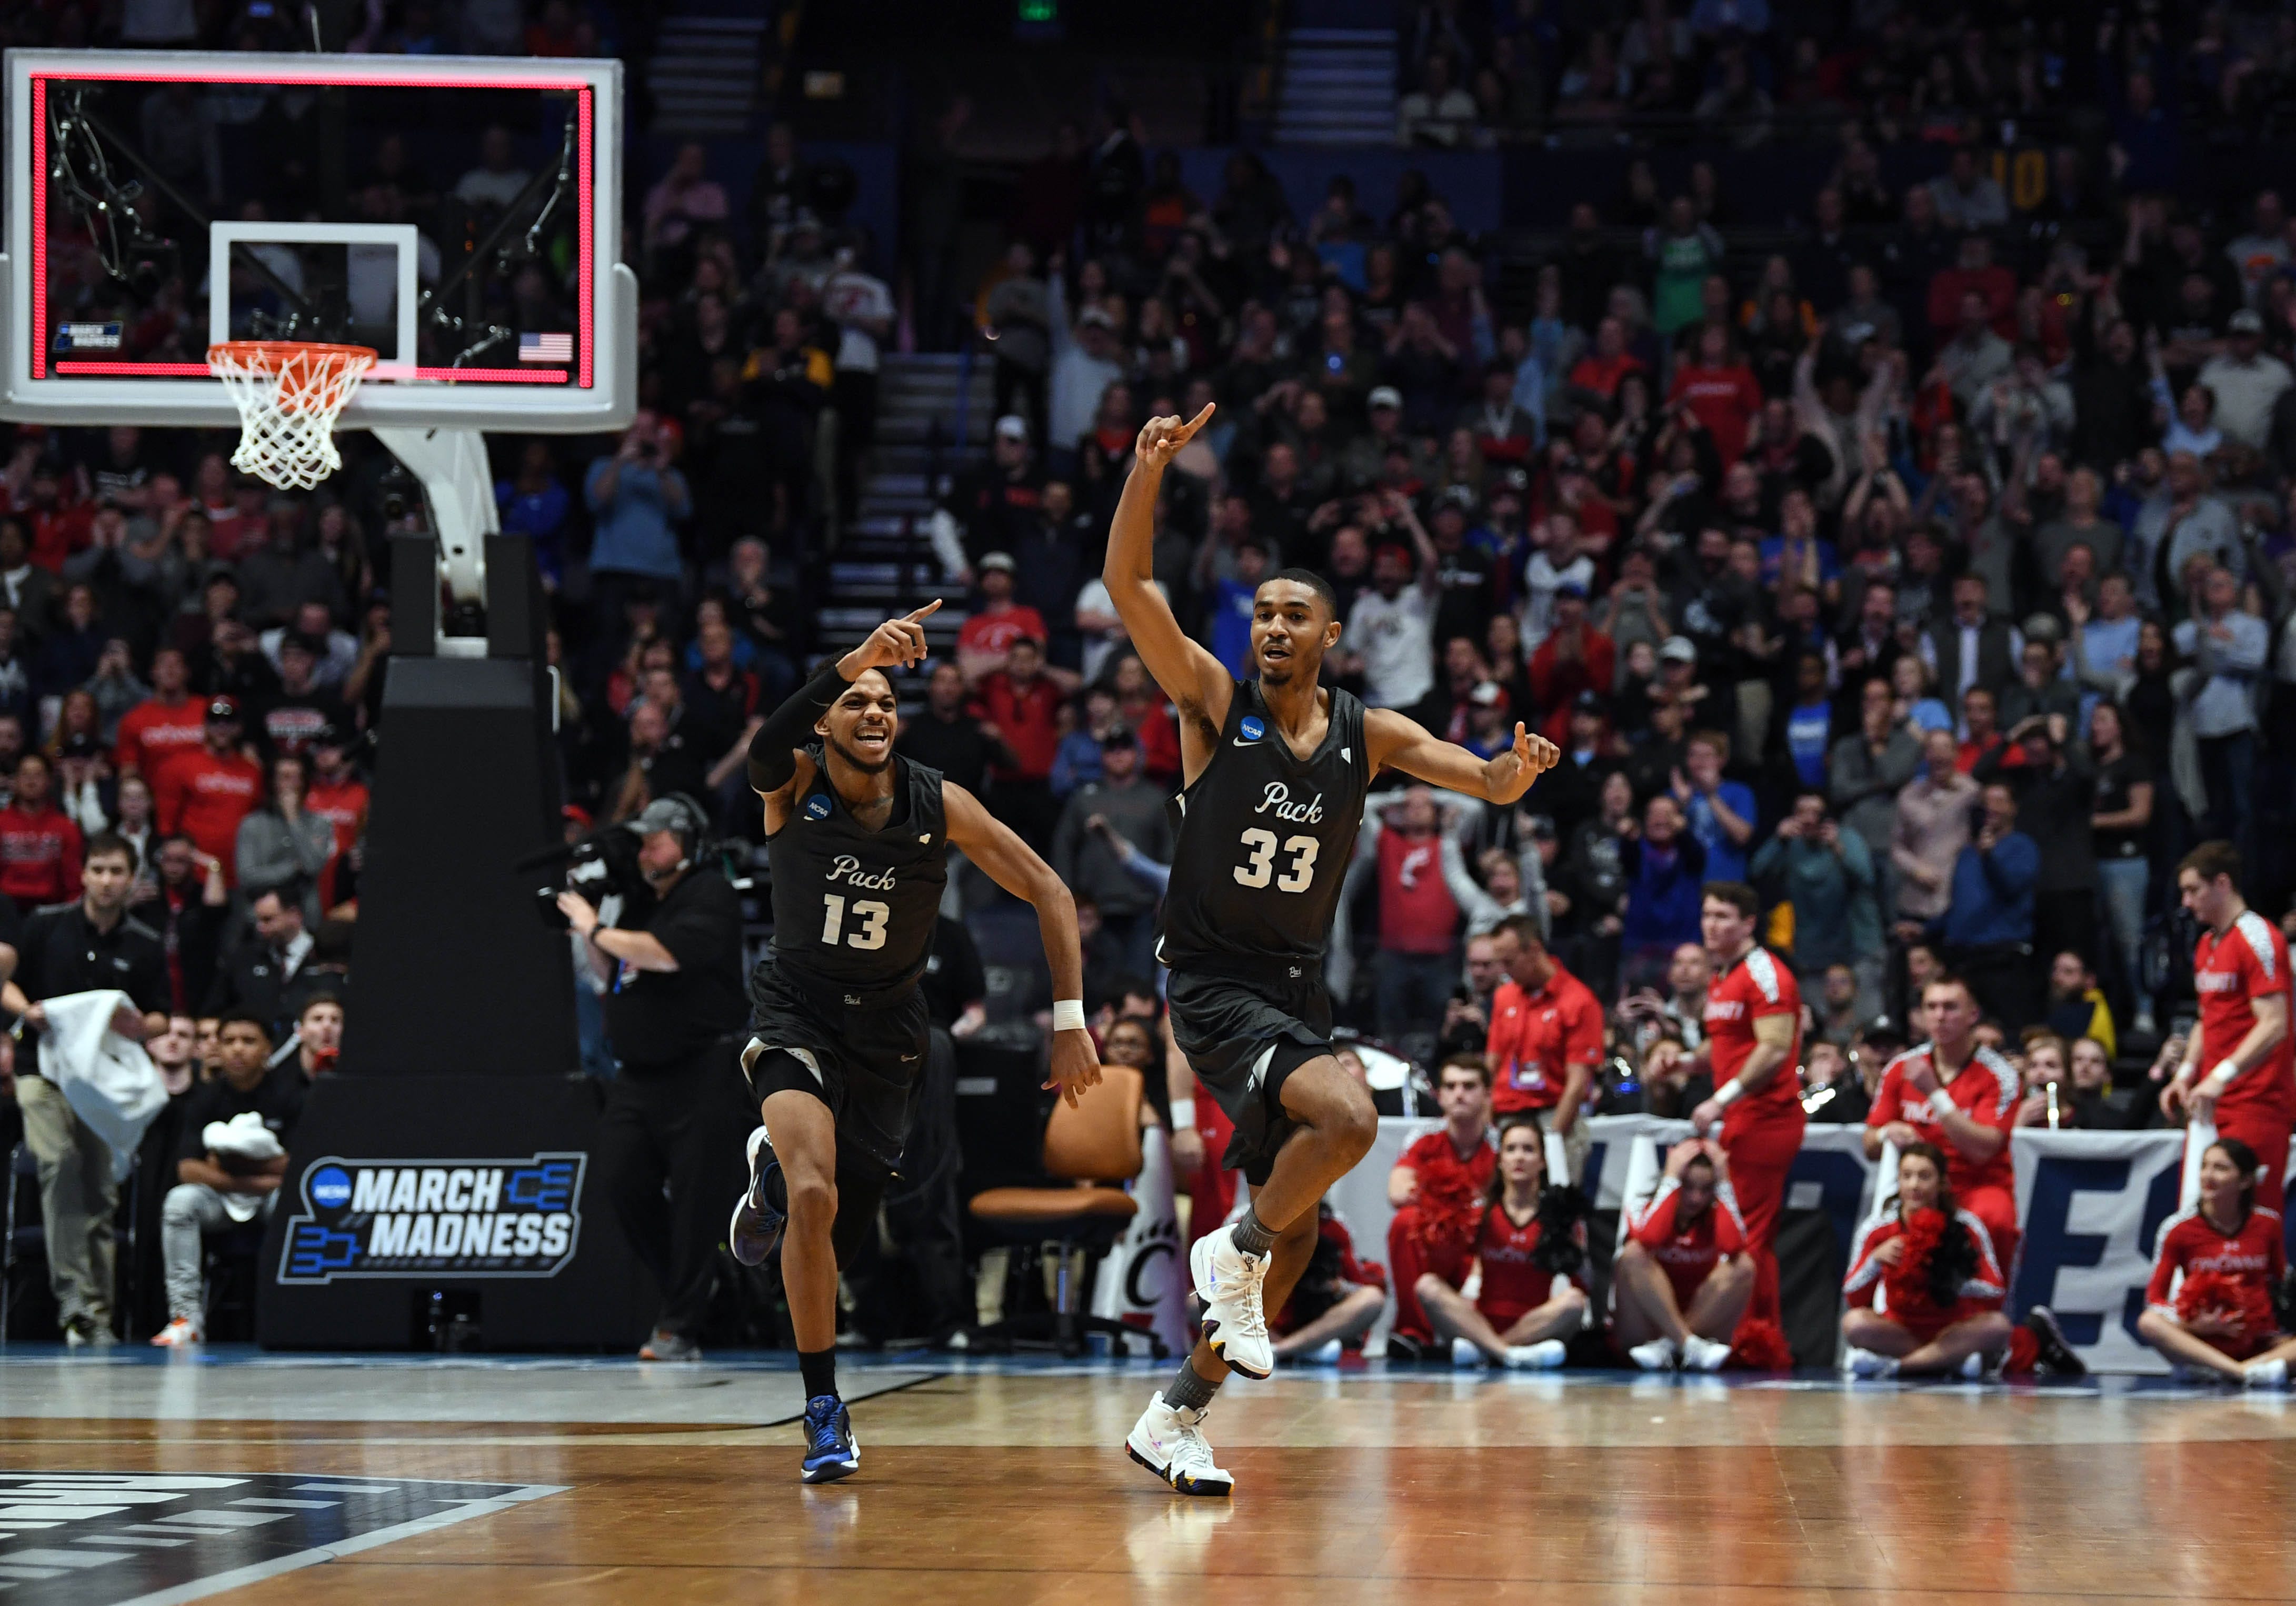 Wolf Pack guard Josh Hall reacts after defeating the Cincinnati Bearcats in the second round of the NCAA Tournament at Bridgestone Arena in Nashville, Tenn.